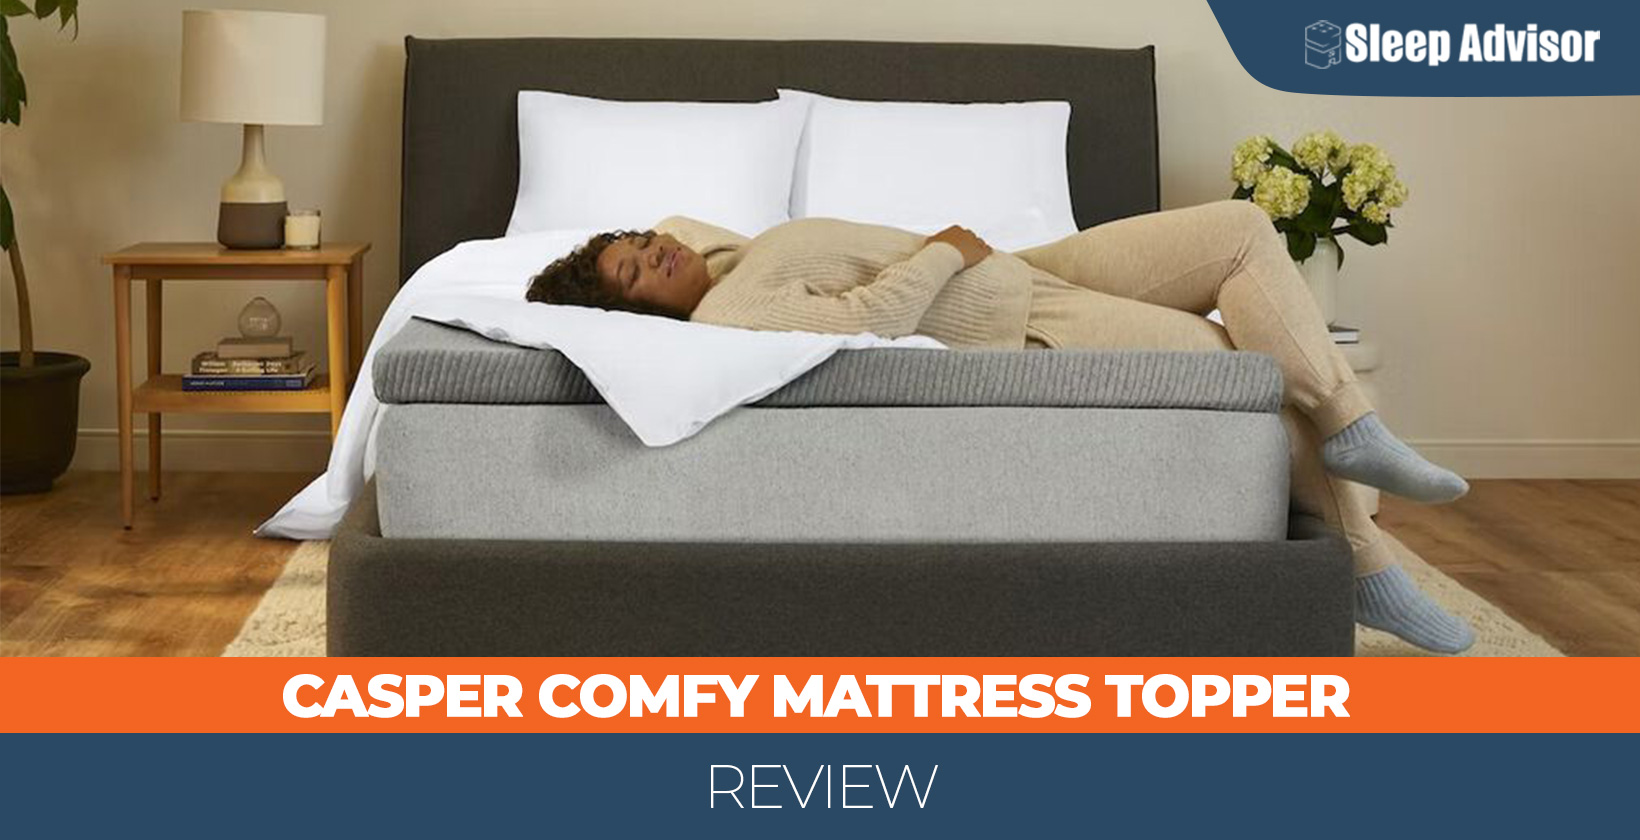 Our in depth overview of the Casper Comfy Mattress Topper